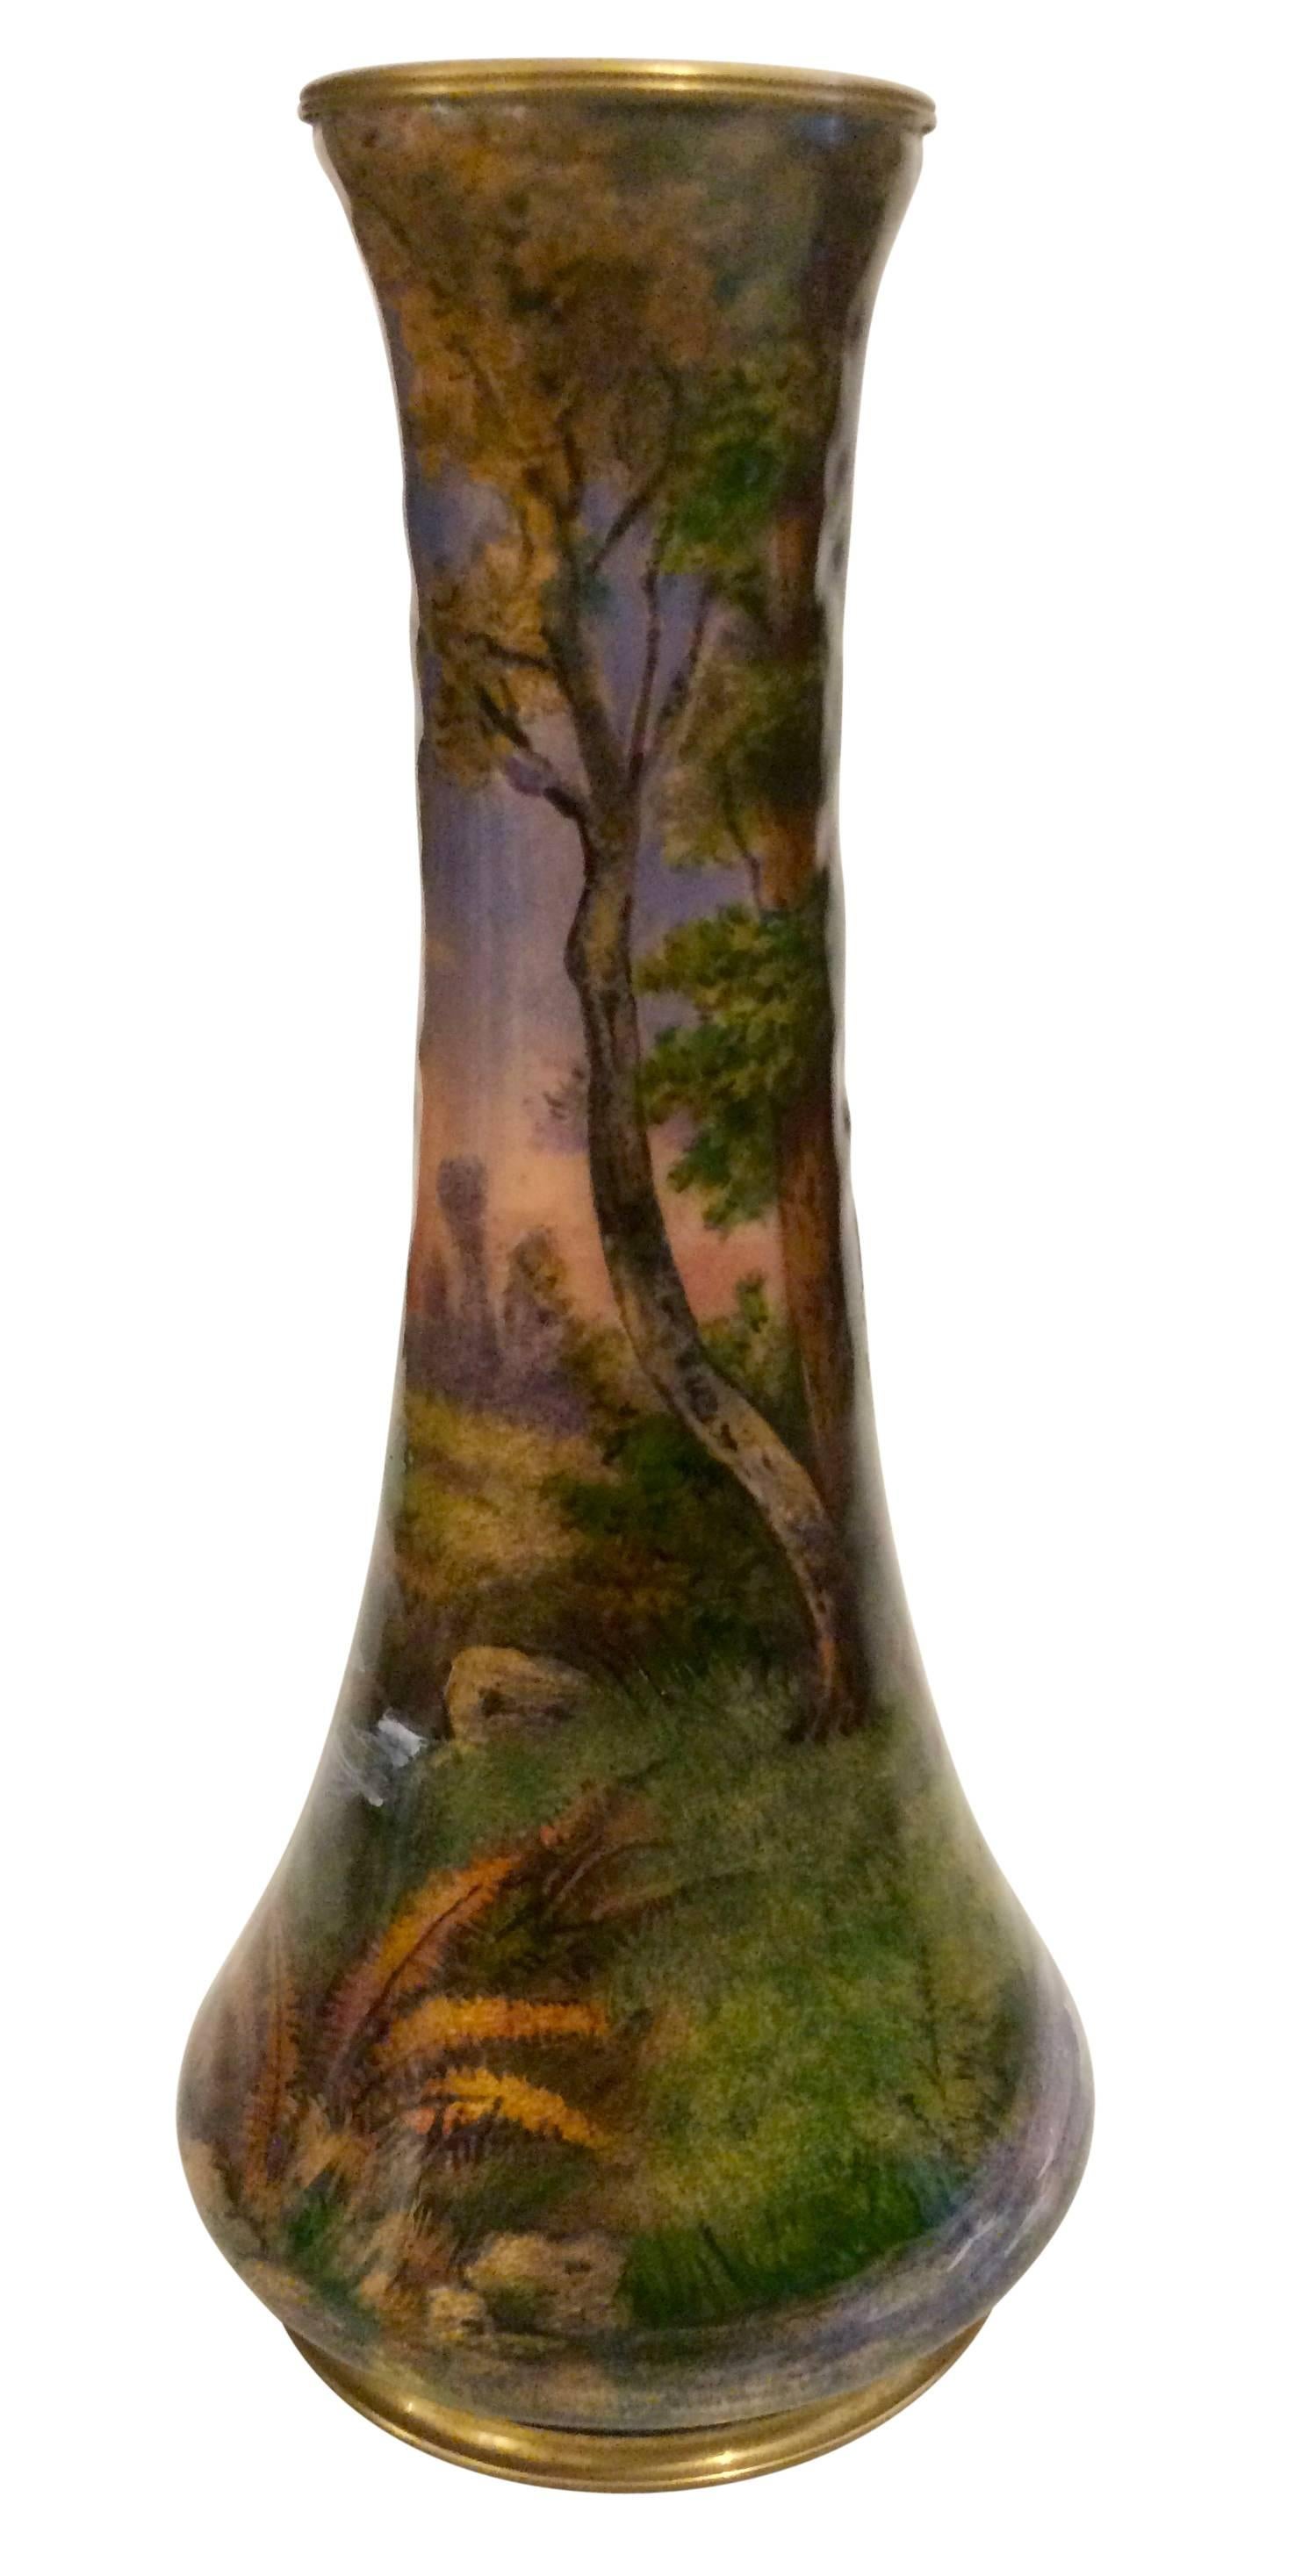 An exquisite French enameled copper vase,
circa 1920 signed by Jules Sarlandie. The artist has succeeded in bringing the hunting motive to the vase in this complicated technique.
   